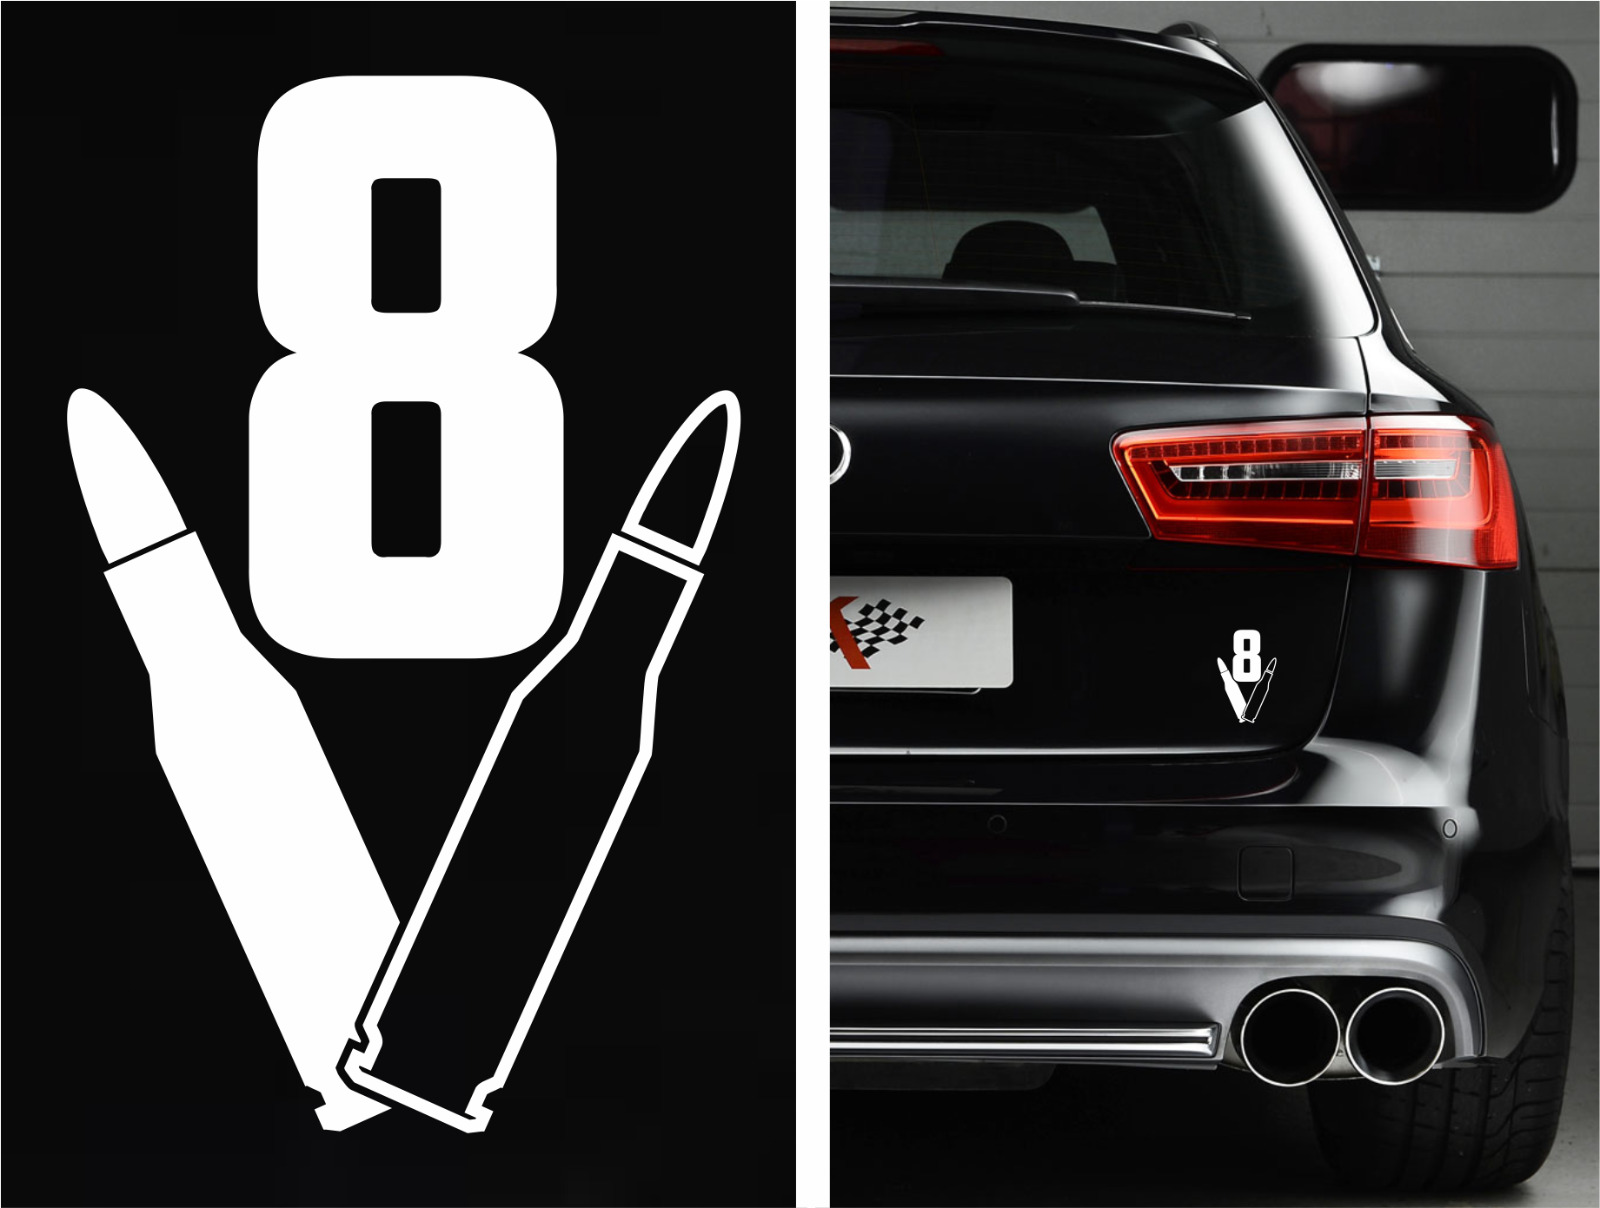 V8 Bullet Badge Bumper Sticker Vinyl Decal Muscle Car Decal Fits Ford Mustang GT